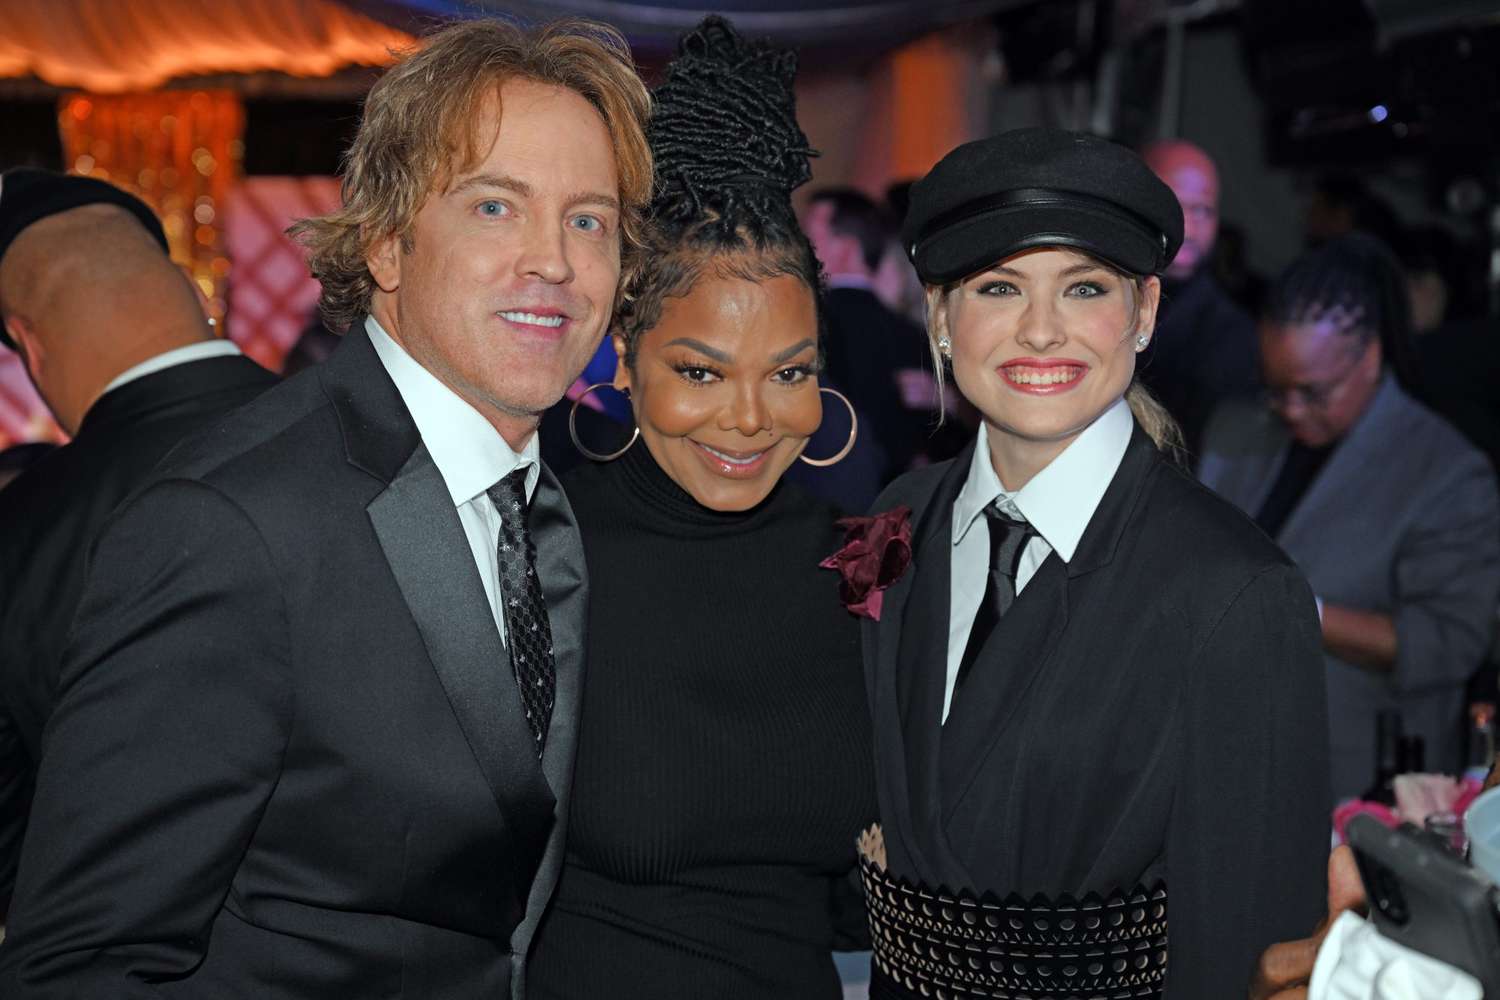 LOUISVILLE, KENTUCKY - MAY 06: Larry Birkhead, Janet Jackson, and Dannielynn Birkhead attends the Barnstable Brown Gala at Barnstable-Brown Mansion on May 06, 2022 in Louisville, Kentucky. (Photo by Stephen J. Cohen/Getty Images)